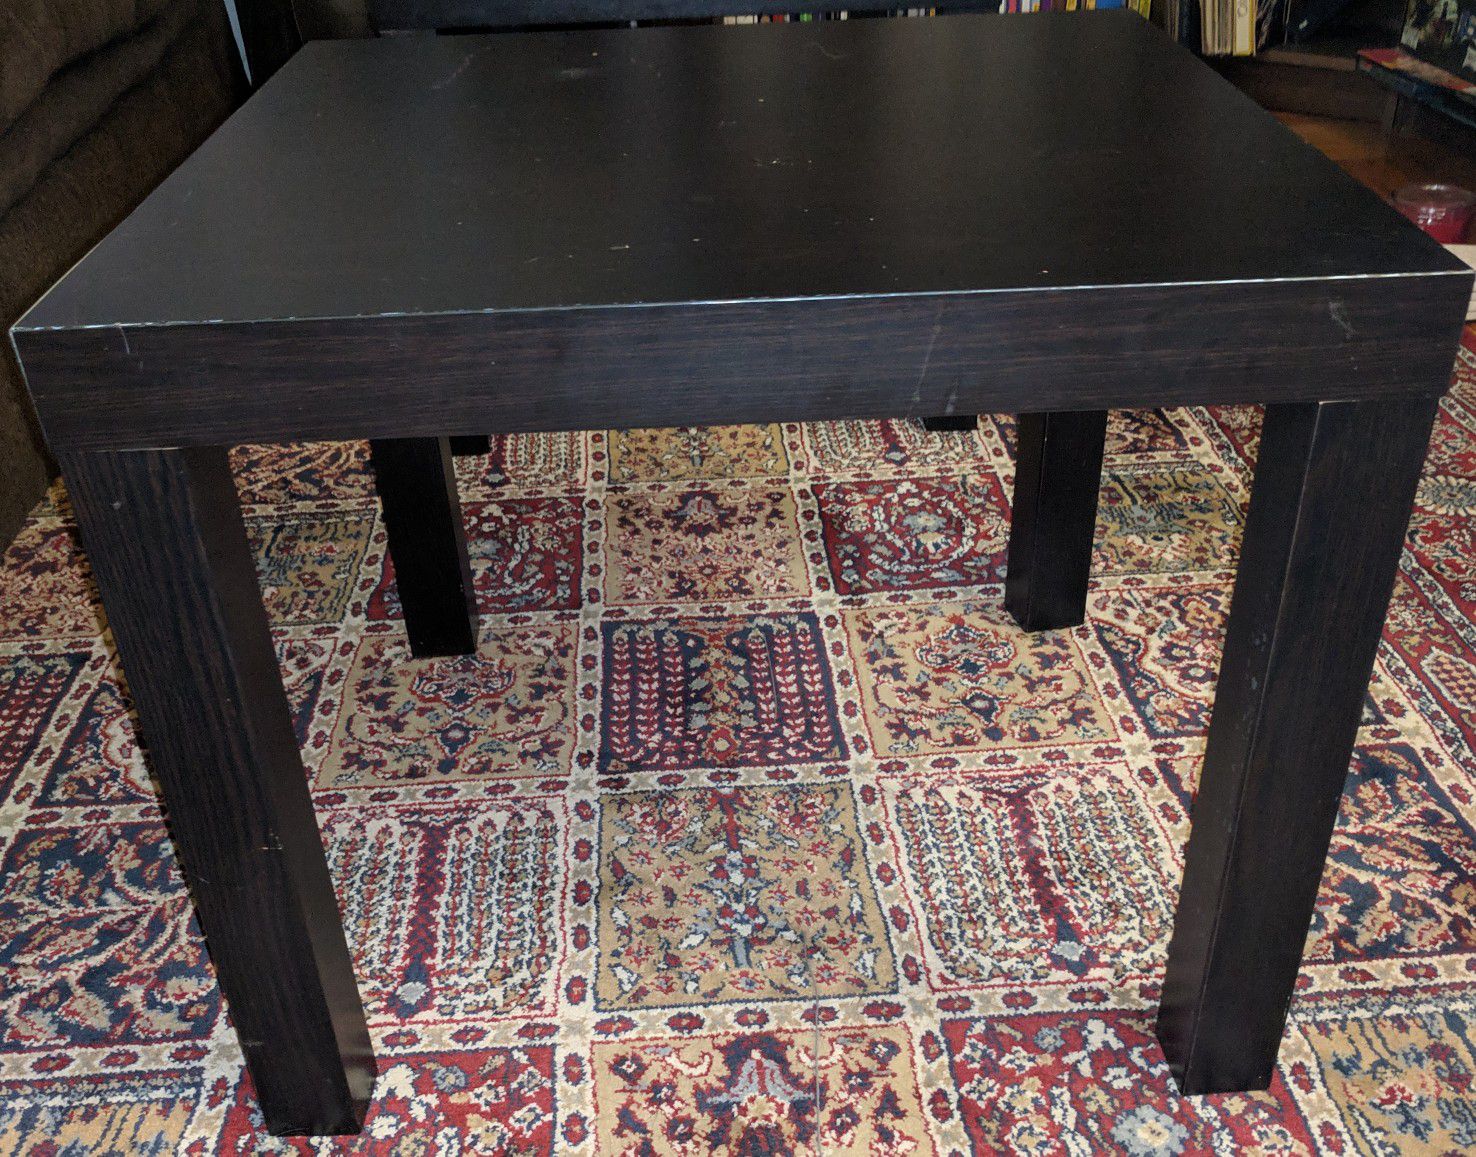 Coffee table & 2 end tables - black